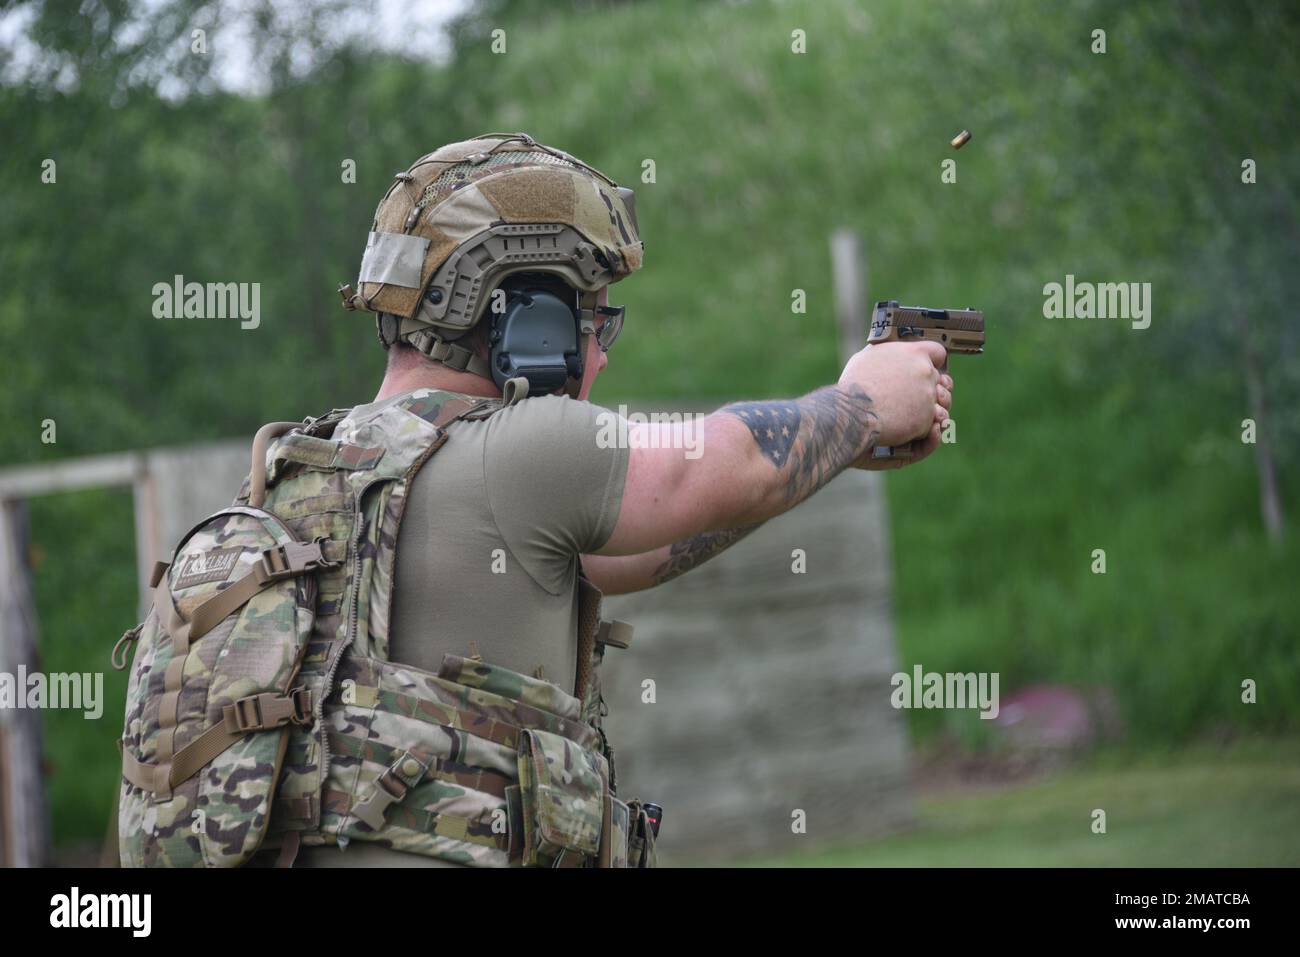 185th Air Refueling Wing Security Forces member Senior Airman Ethan Hanson, shoots an M18 pistol on June 4, 2022, at the 185th ARW firing range in Sioux City, Iowa. Hanson, along with the other Security Forces personnel must complete the weapons qualification training annually. Stock Photo